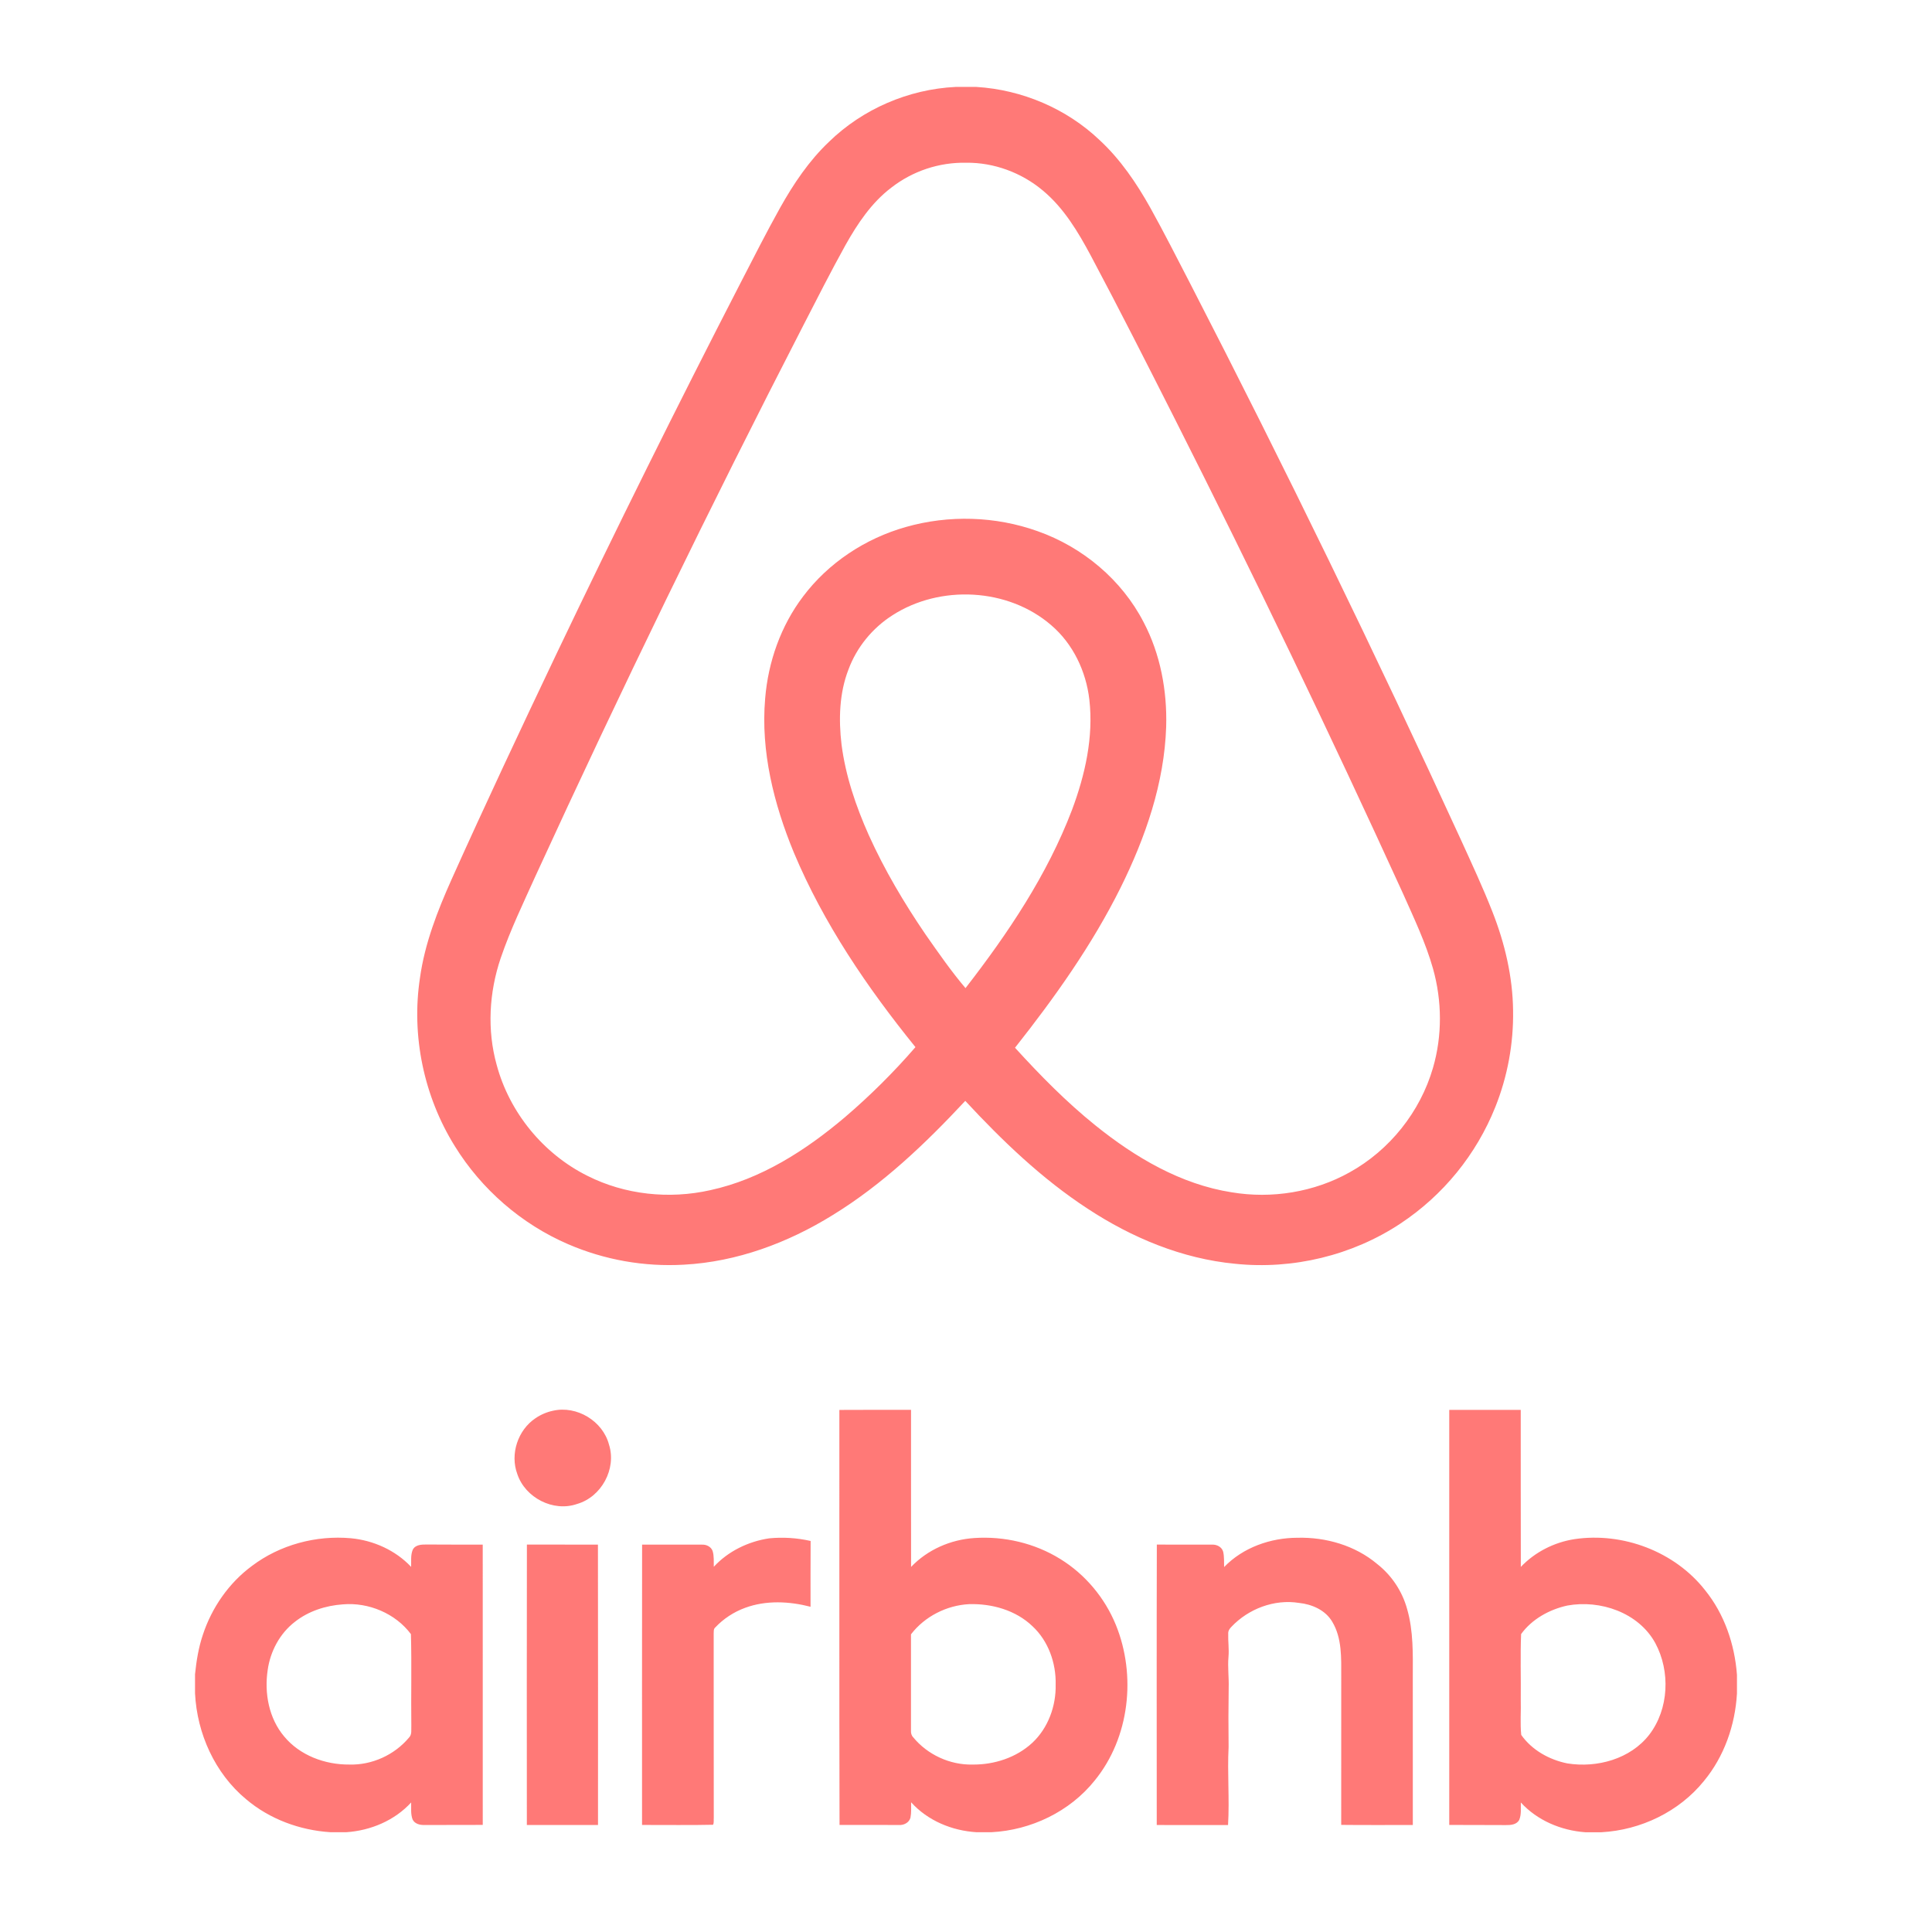 airbnb 2 logo png